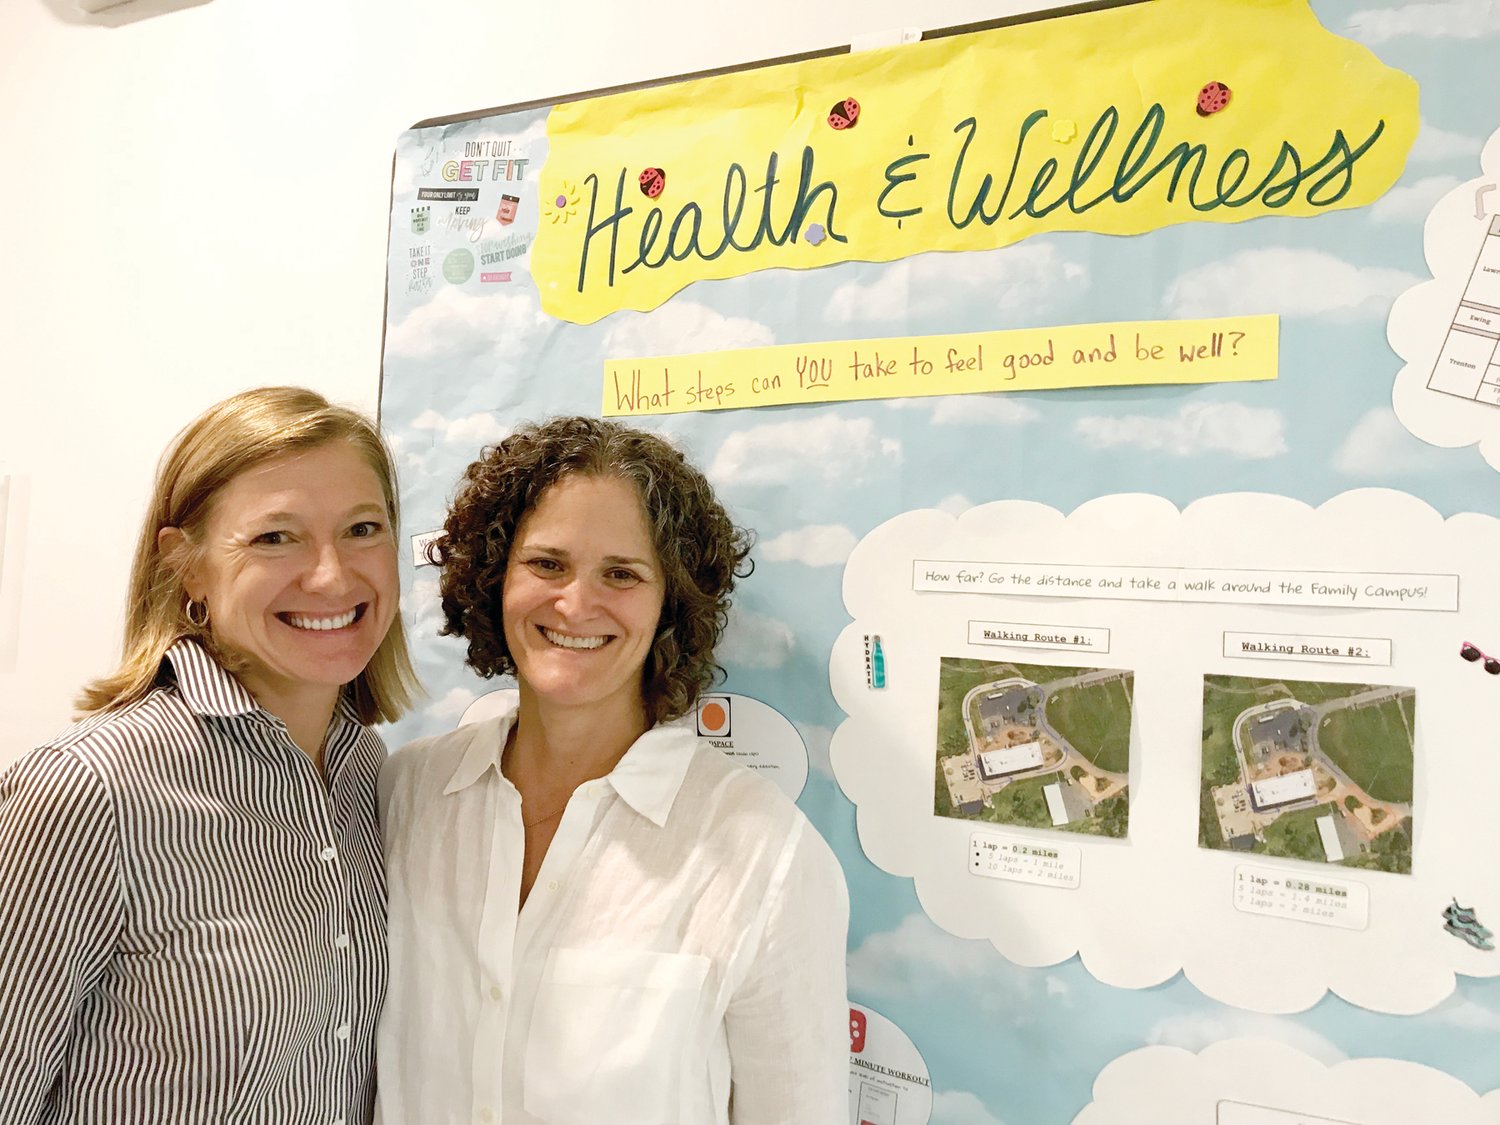 Bucks County residents Melissa Bennett and Linda Sichel have teamed up to teach parents who are experiencing homelessness about common children’s health issues, and how to find their families the health care they need.